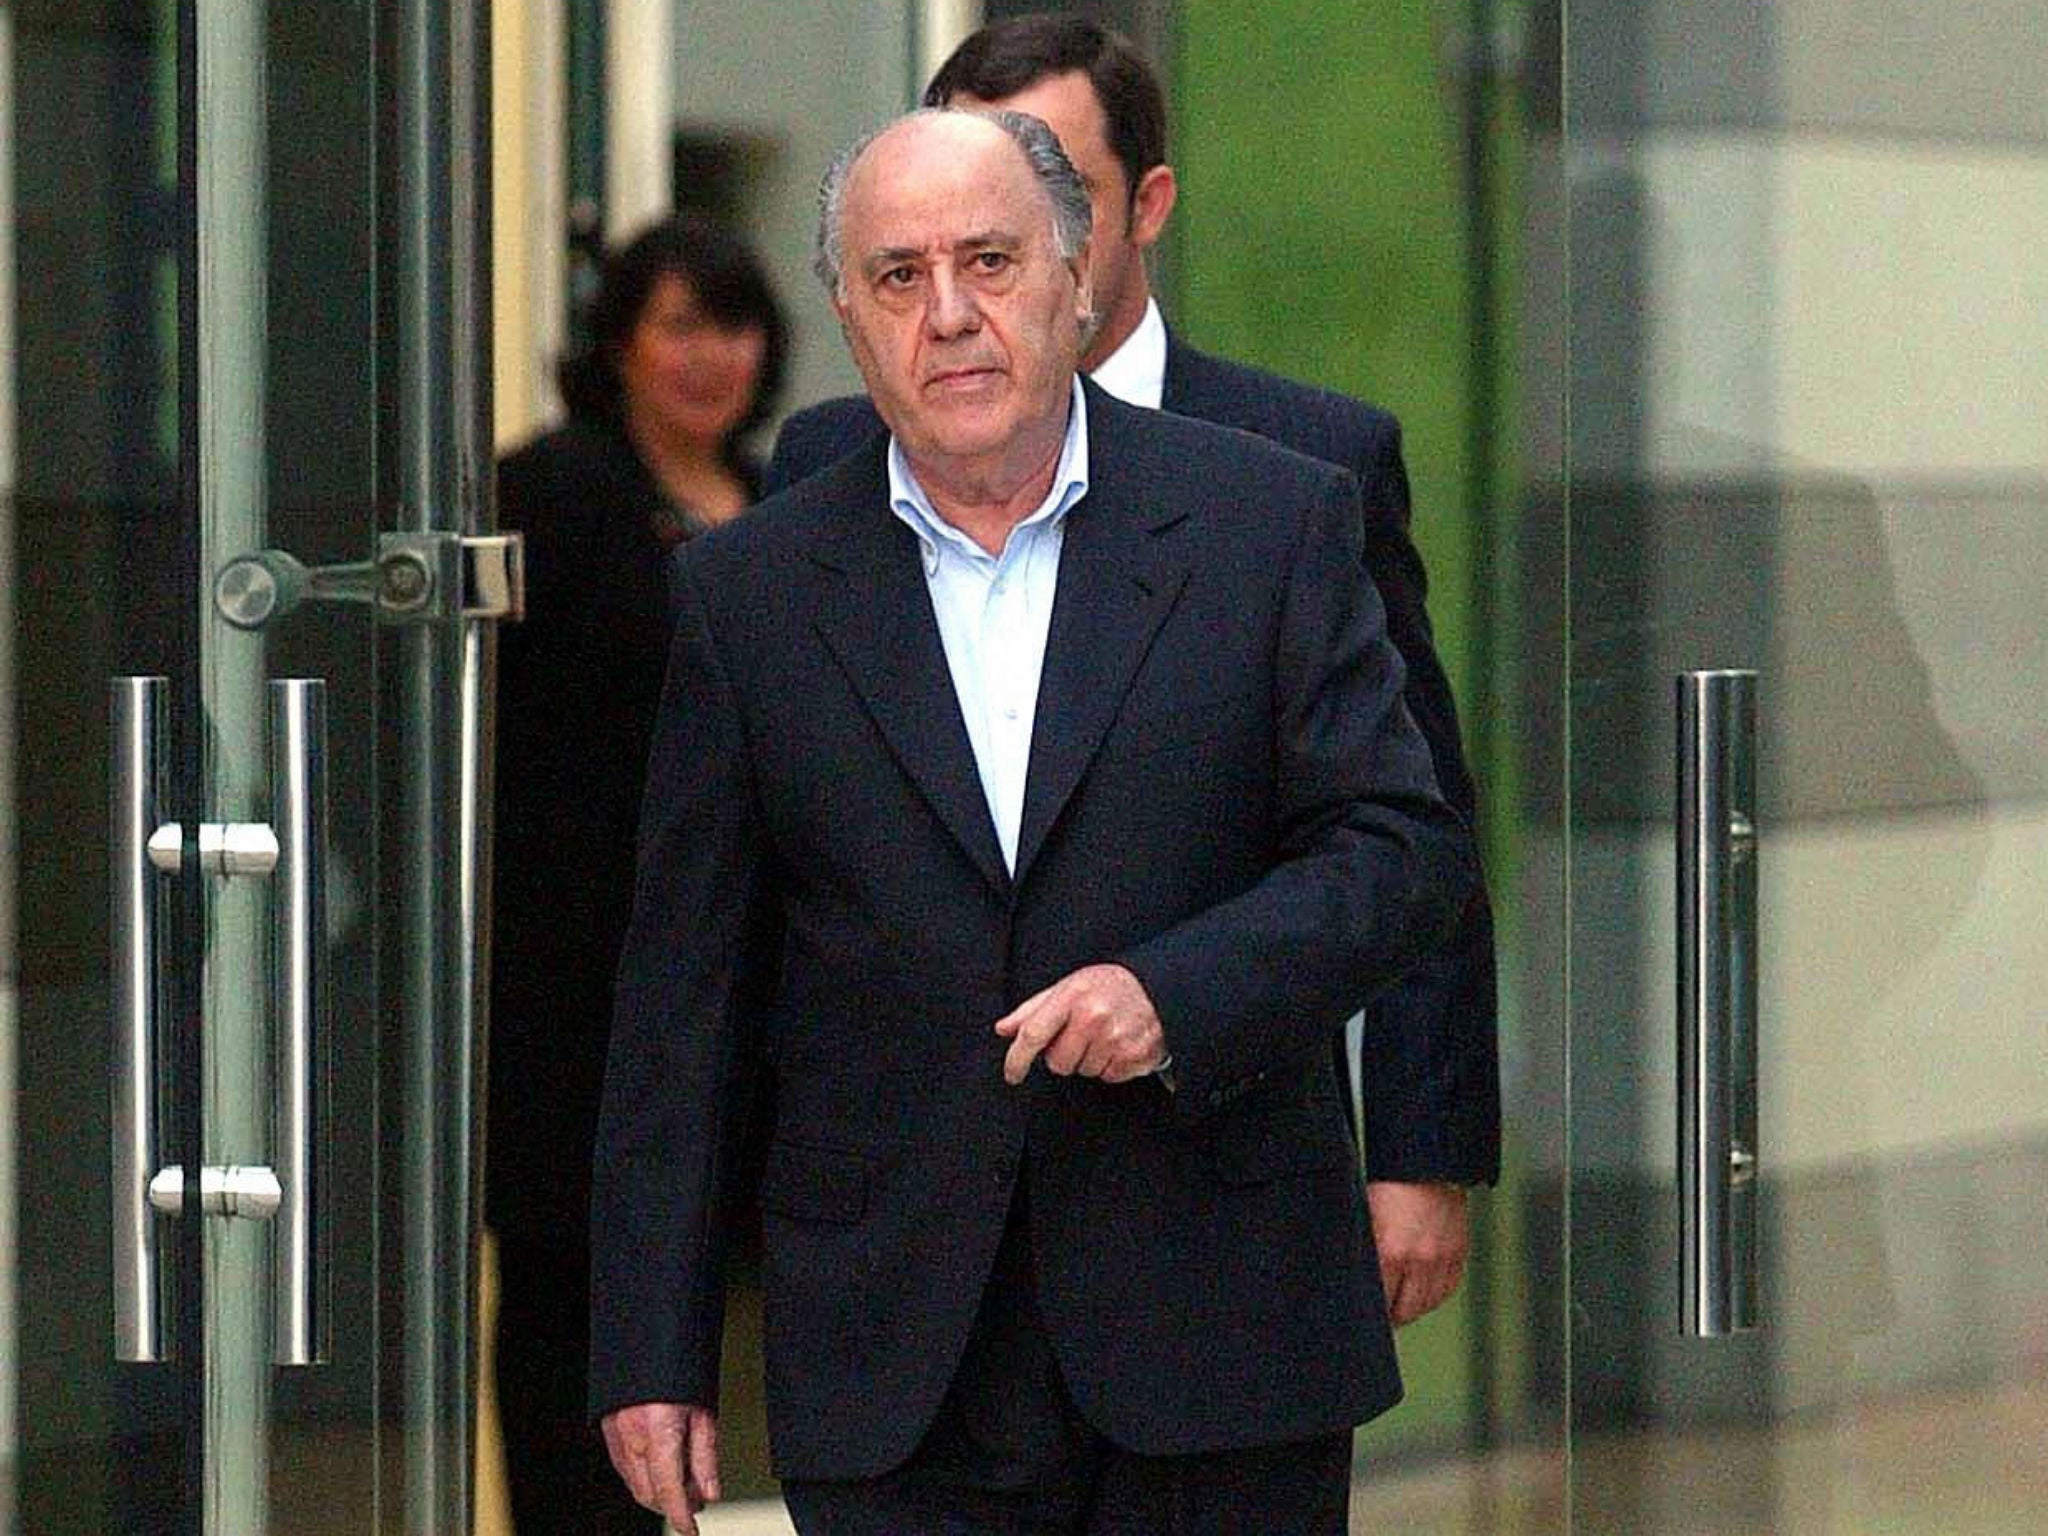 Amancio Ortega is now the richest man in the world, according to Forbes